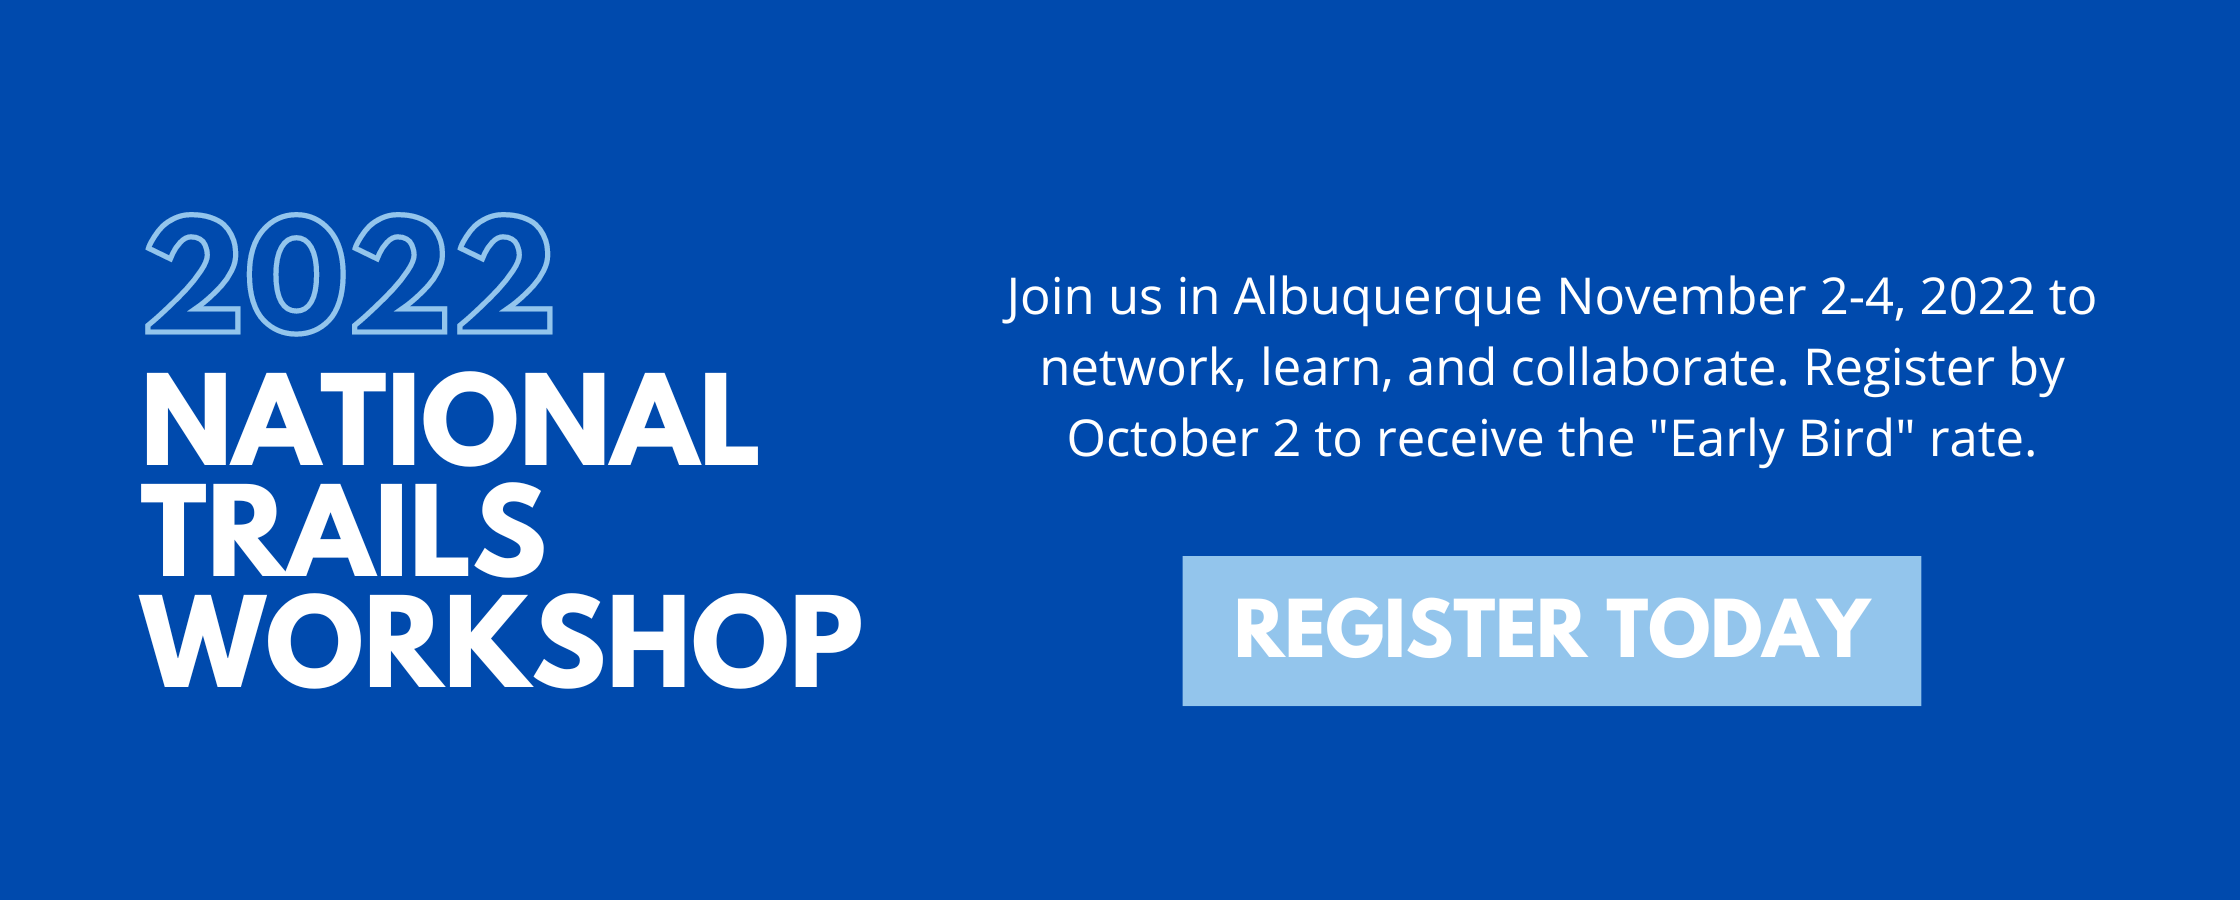 Text reads, "NATIONAL TRAILS WORKSHOP. Join us in Albuquerque November 2-4, 2022 to network, learn, and collaborate. Register by October 2 to receive the "Early Bird" rate. Register Today."